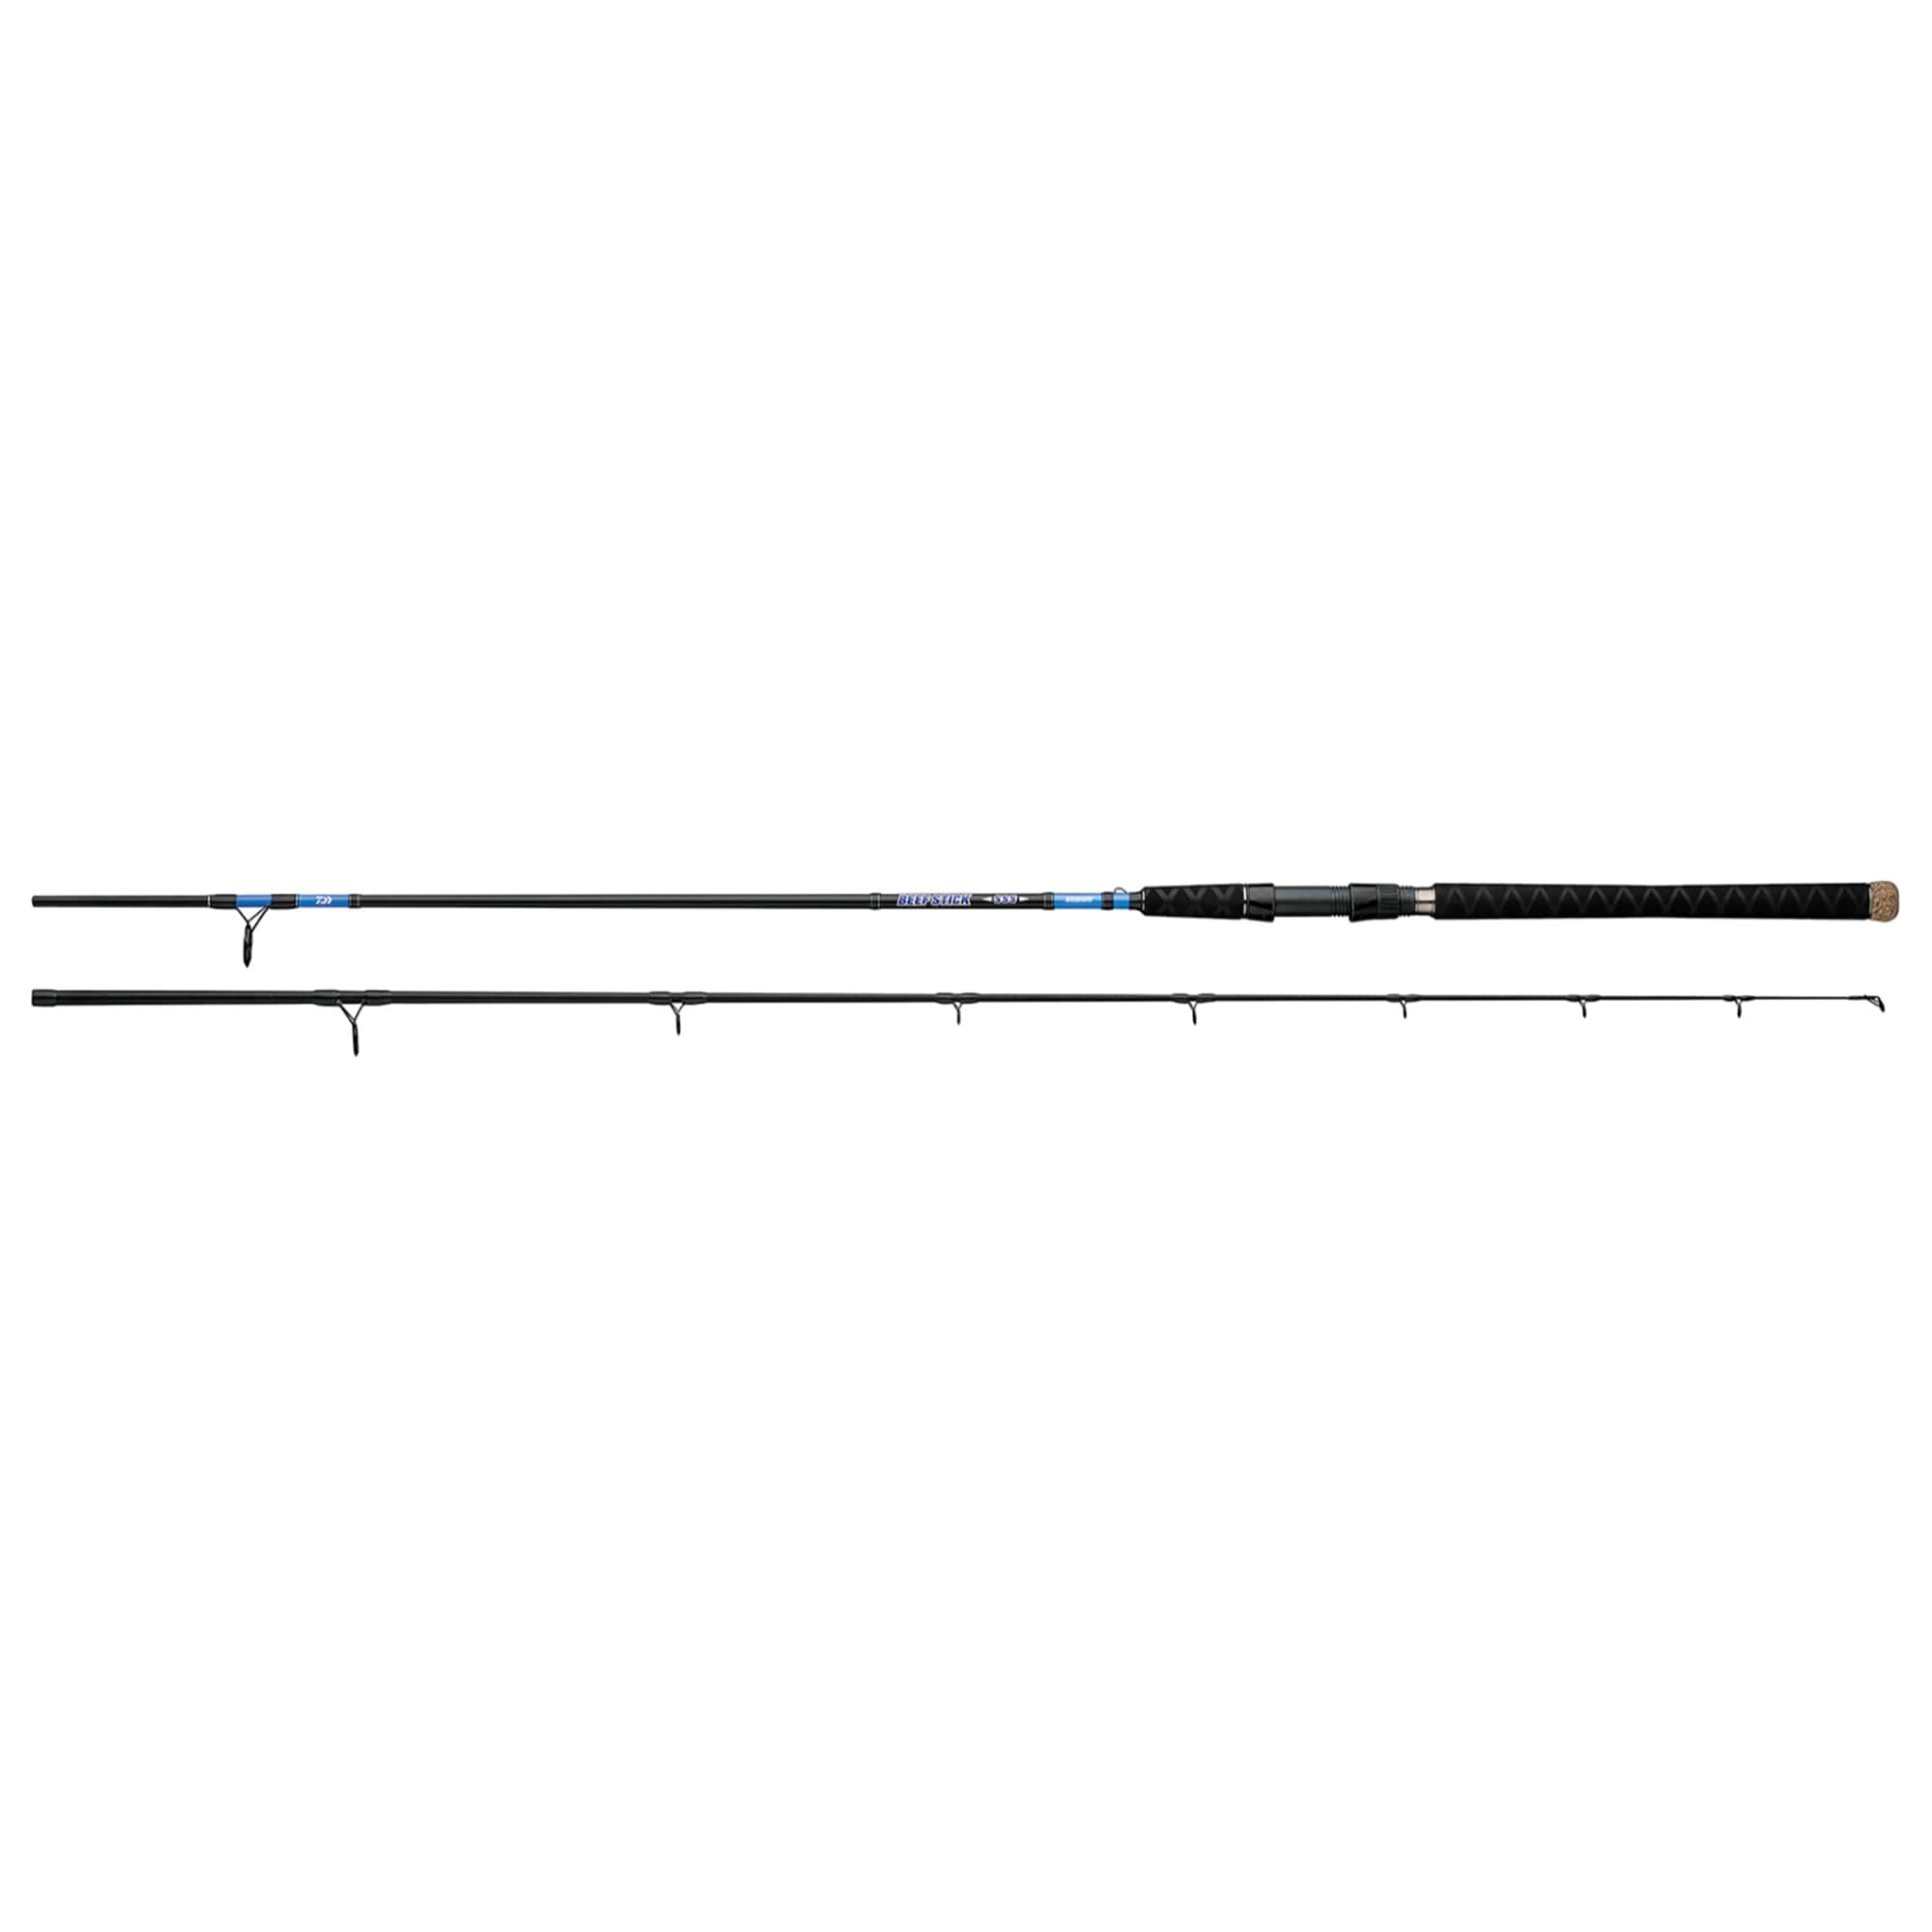 Daiwa Daiwa Acculite Spinning Rod ACLT962LRS 9 ft 6 in 2 pc in the Sports  Equipment department at